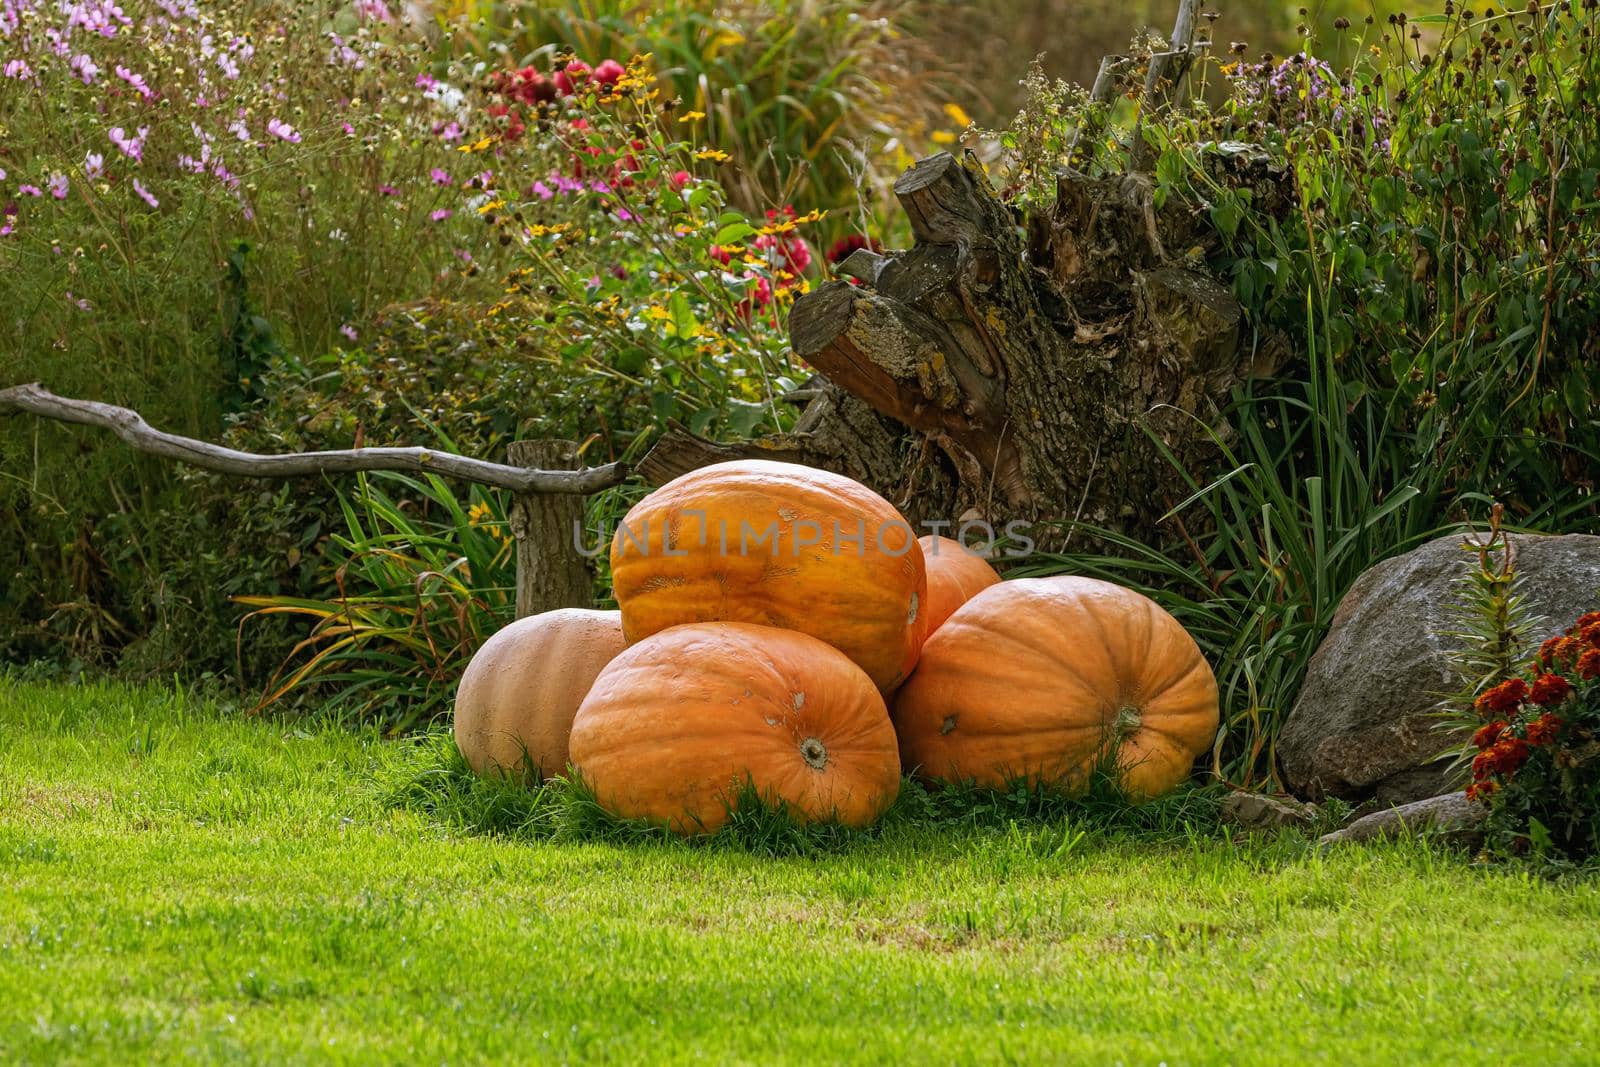 Harvested Crop Pumpkins on the Lawn